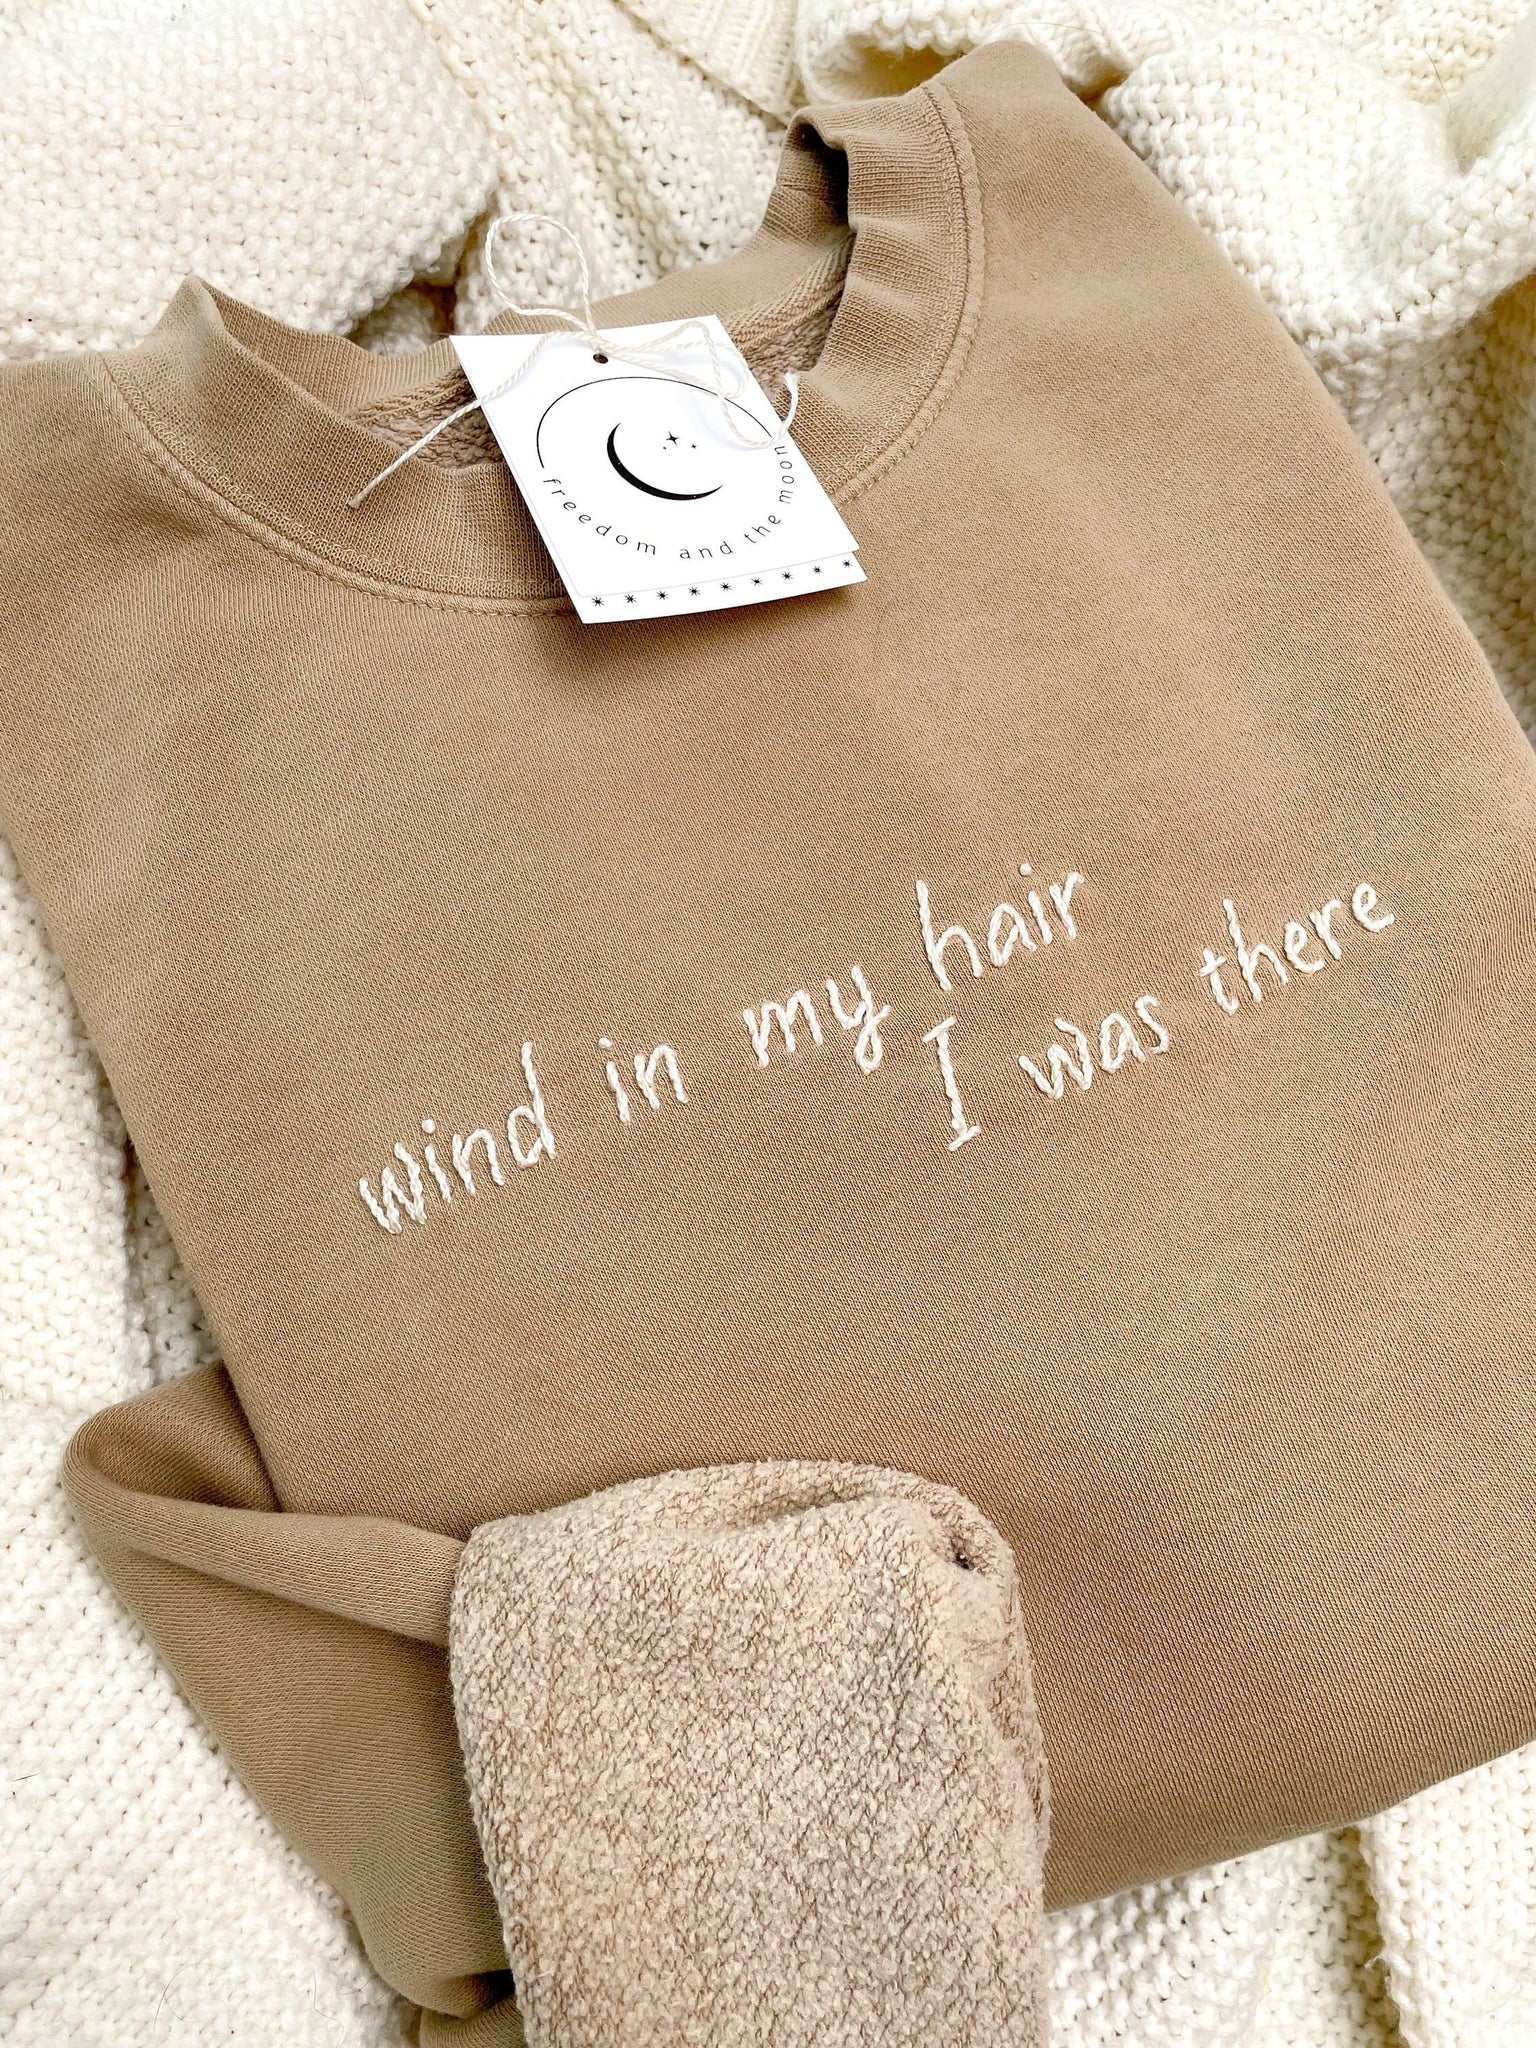 Wind in My Hair I Was There Hand Embroidered Sweatshirt